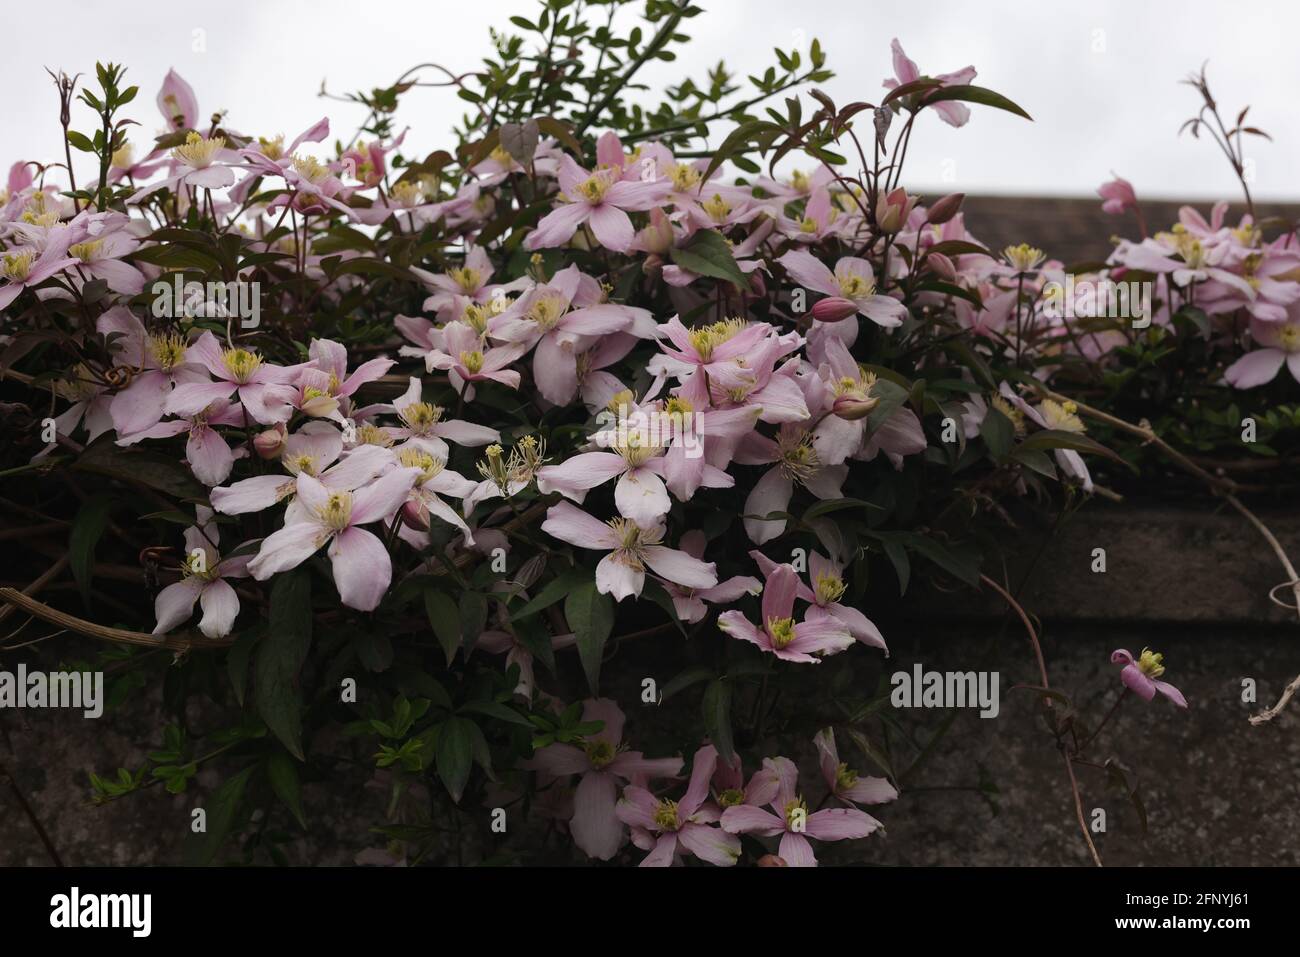 Clematis flowers in UK during spring. Stock Photo